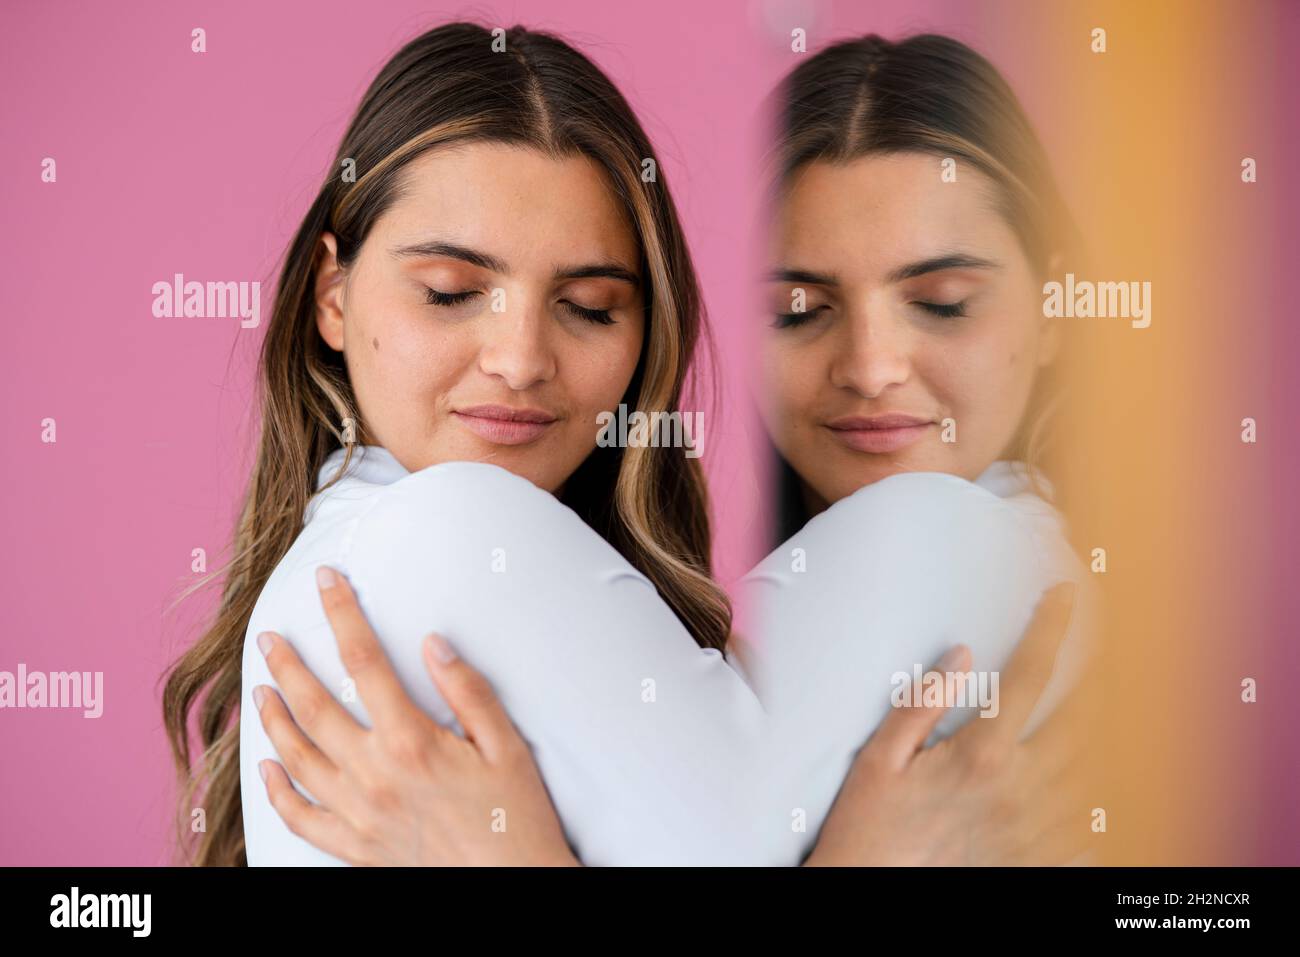 Young female professional hugging self by pink wall Stock Photo